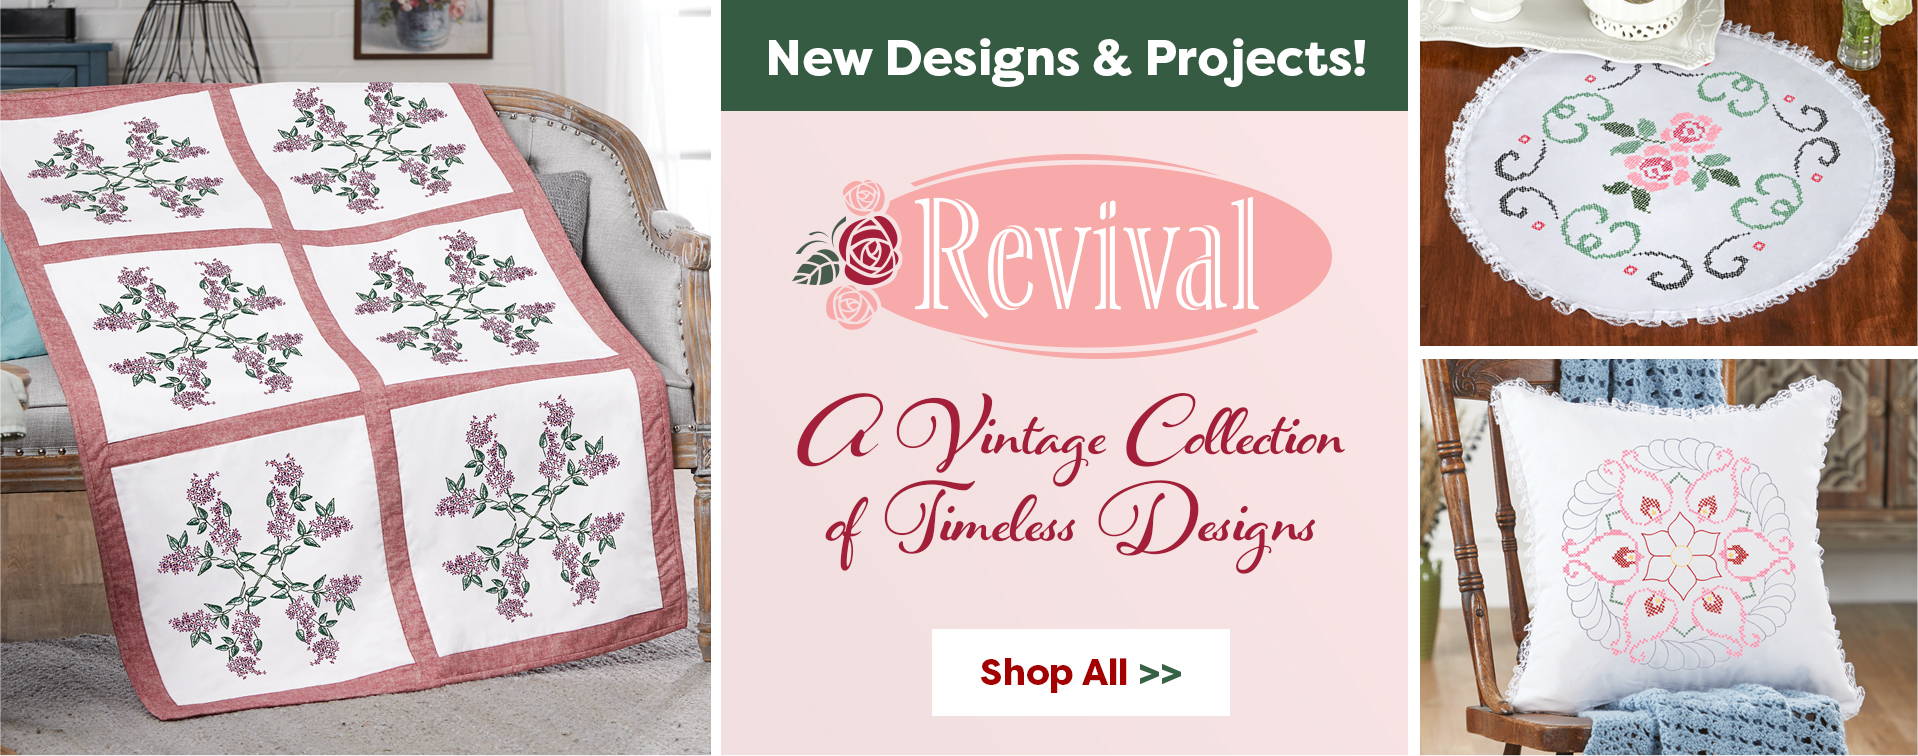 New Revival Designs & Projects